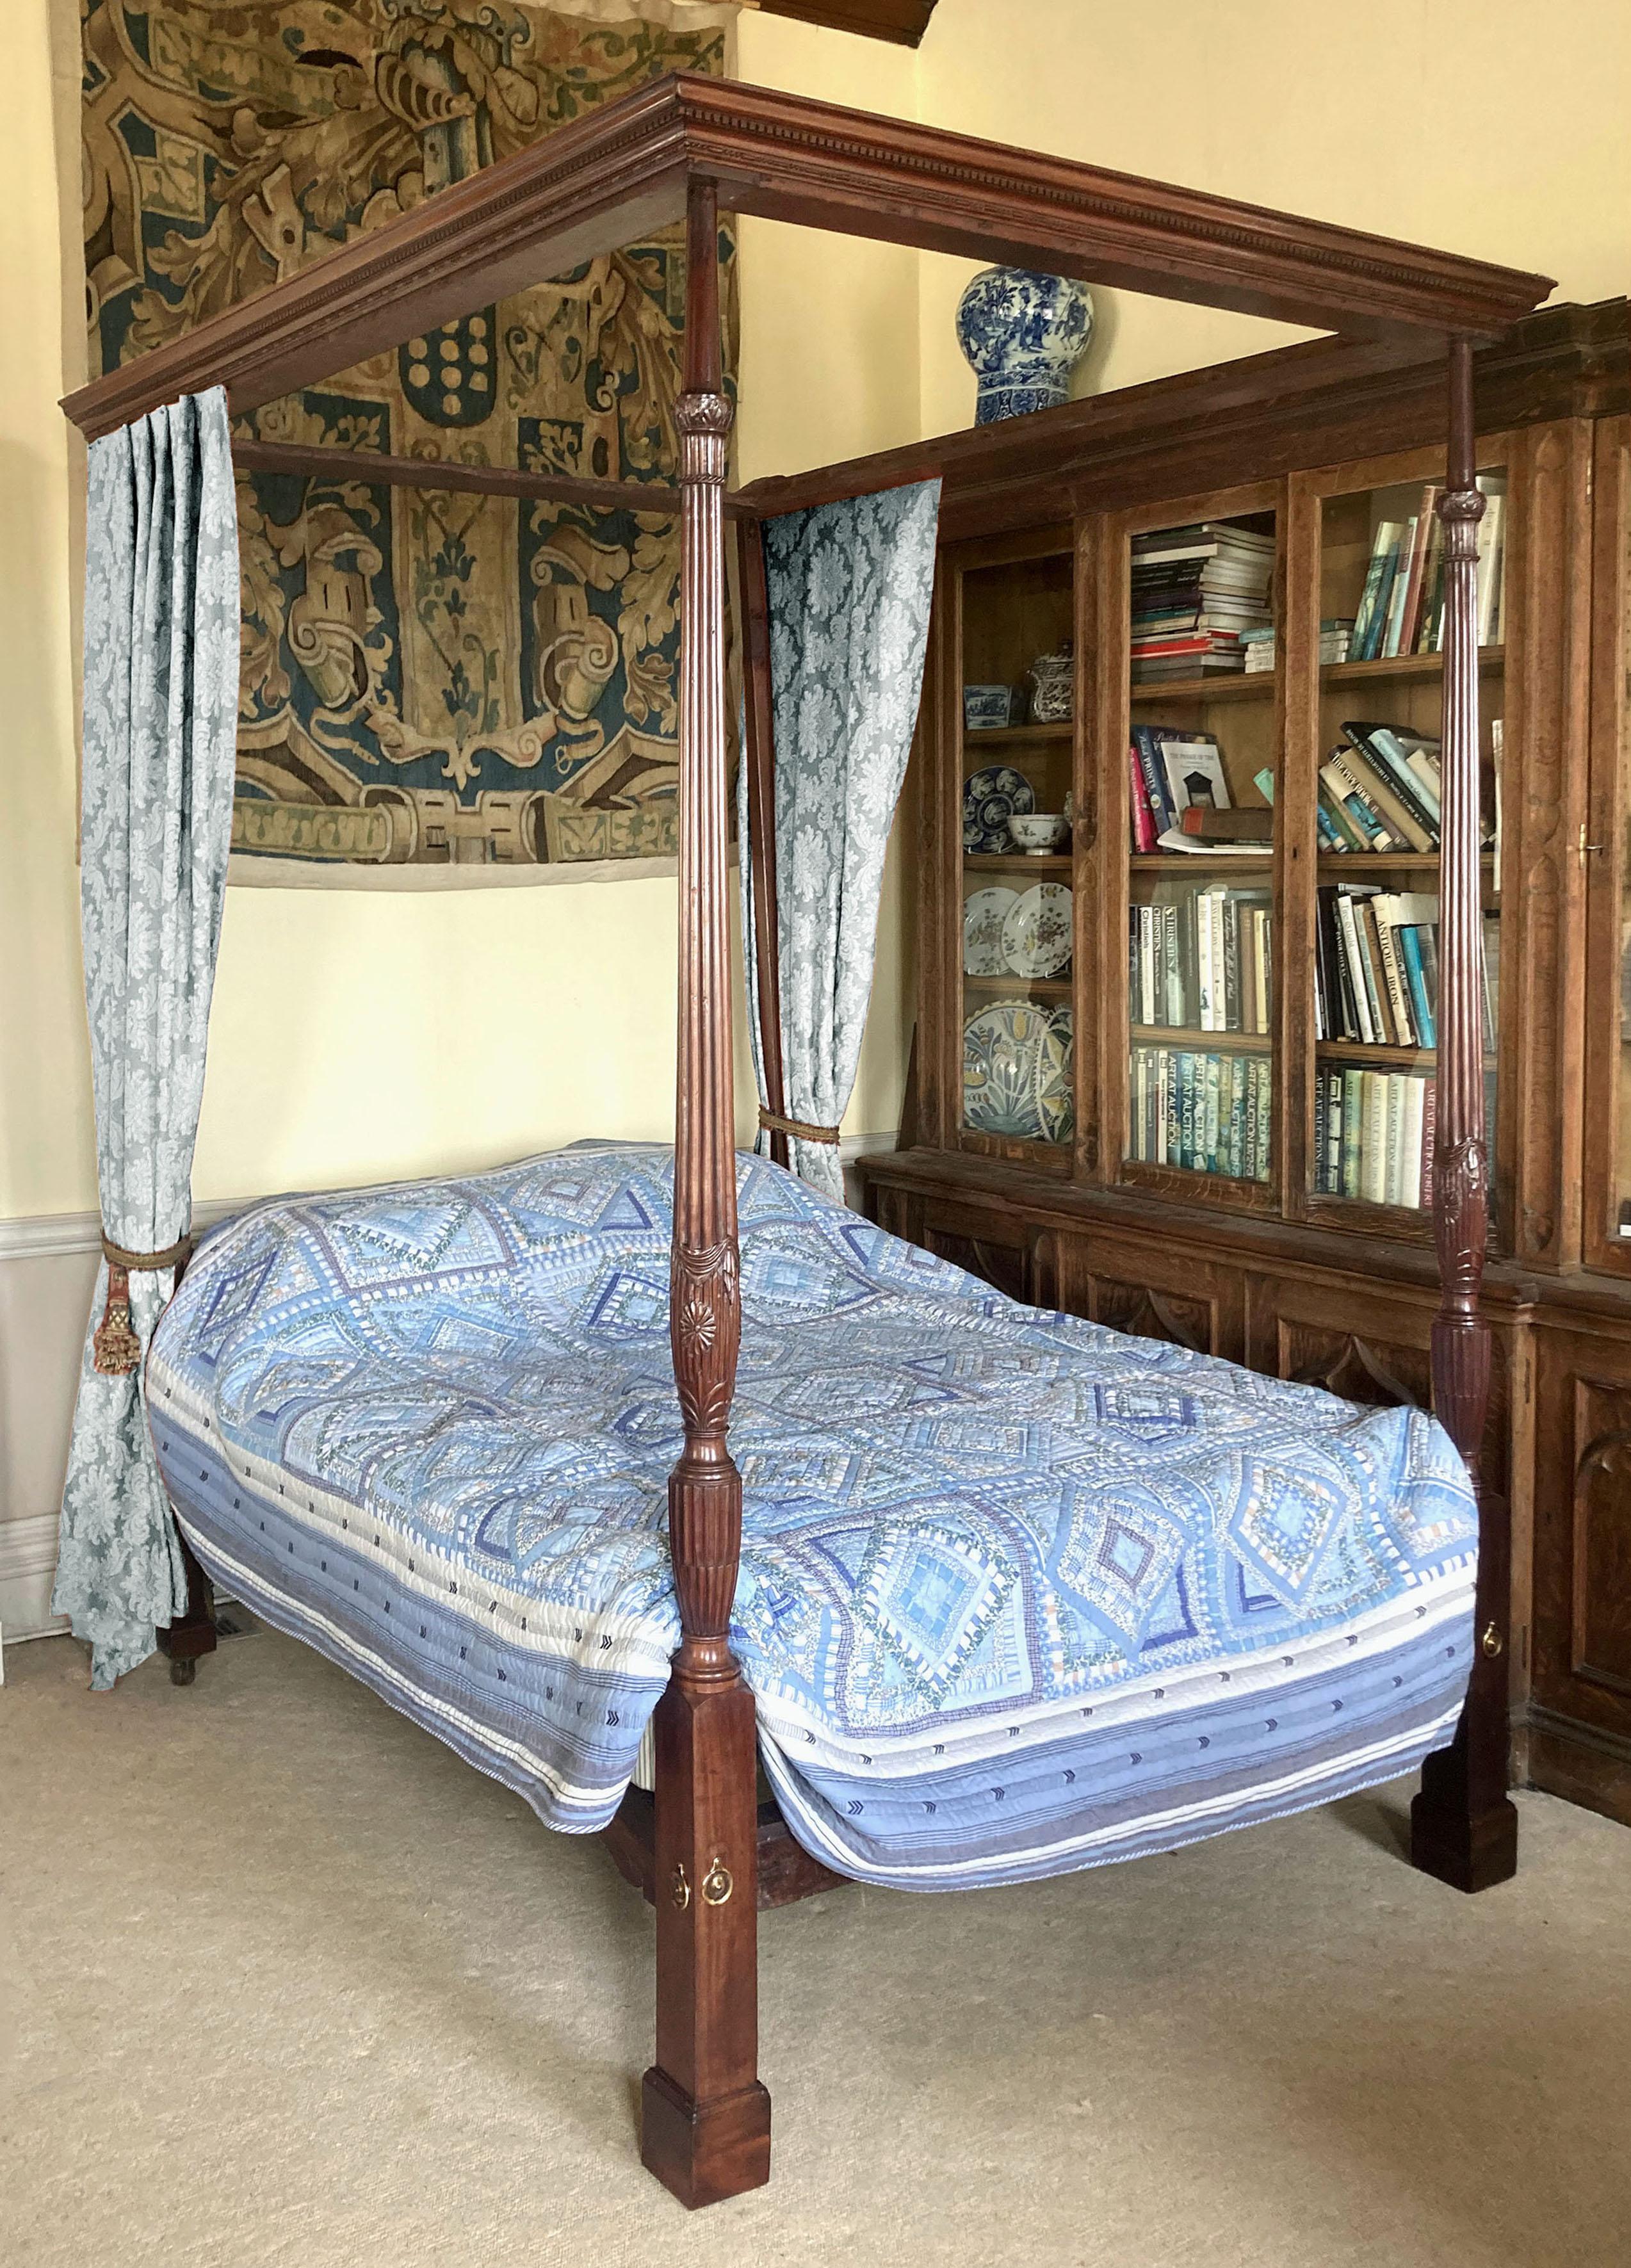 George III mahogany four-poster bed
A George III four poster bed with mahogany end posts particularly finely carved with acanthus leaves, drapery, rope twists, a complete daisy and extensive stop-fluted and reeded detail. The 19th cornice in the